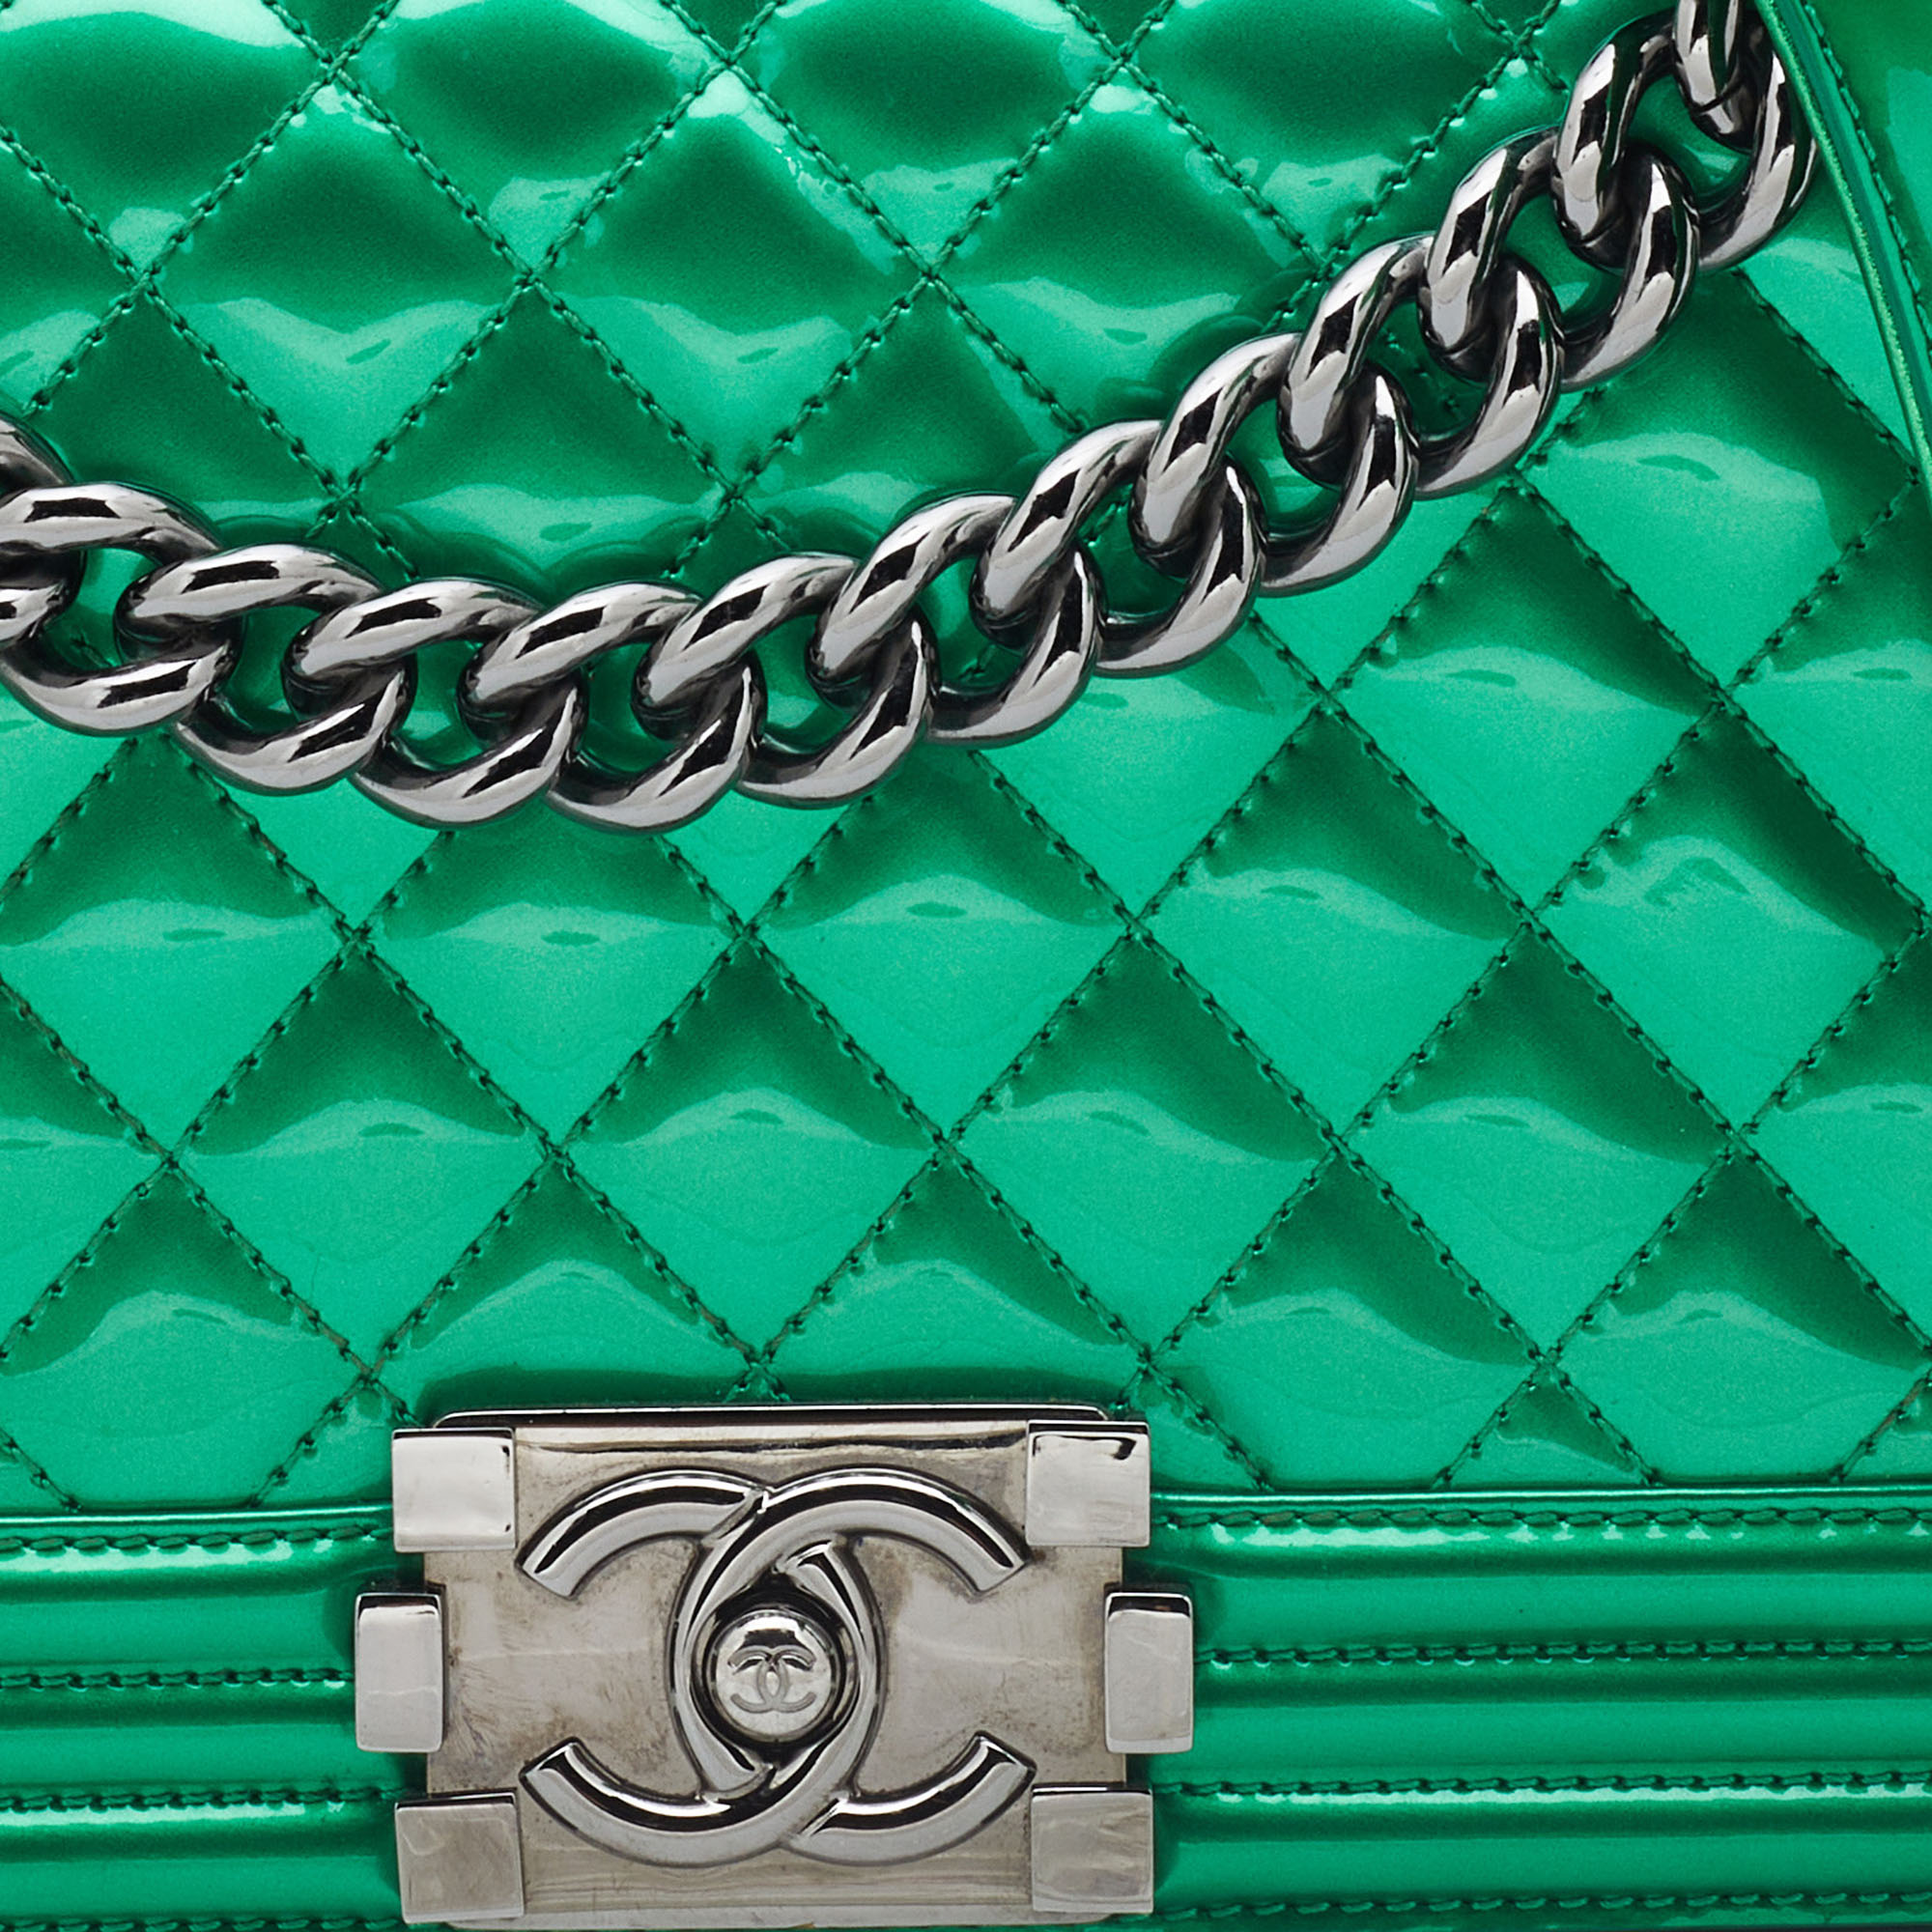 Chanel Green Quilted Patent Leather Medium Boy Flap Bag